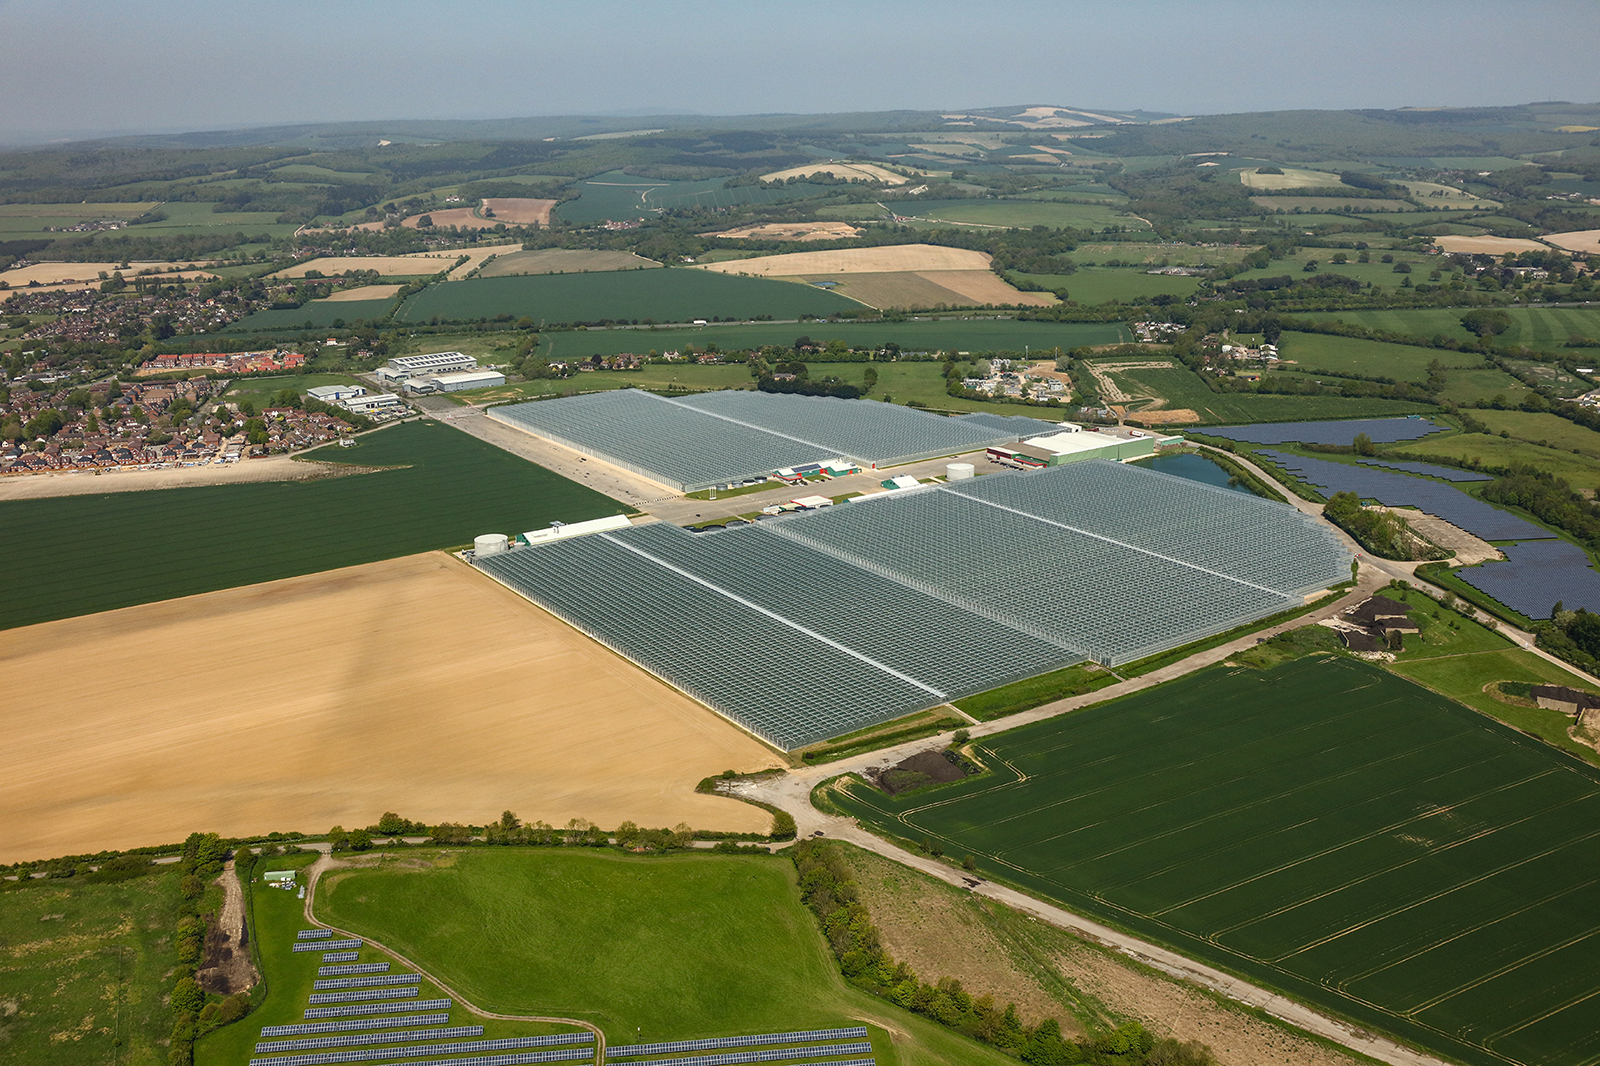 An arial photograph of the glasshouses on Tangmere Airfield Nurseries in the UK